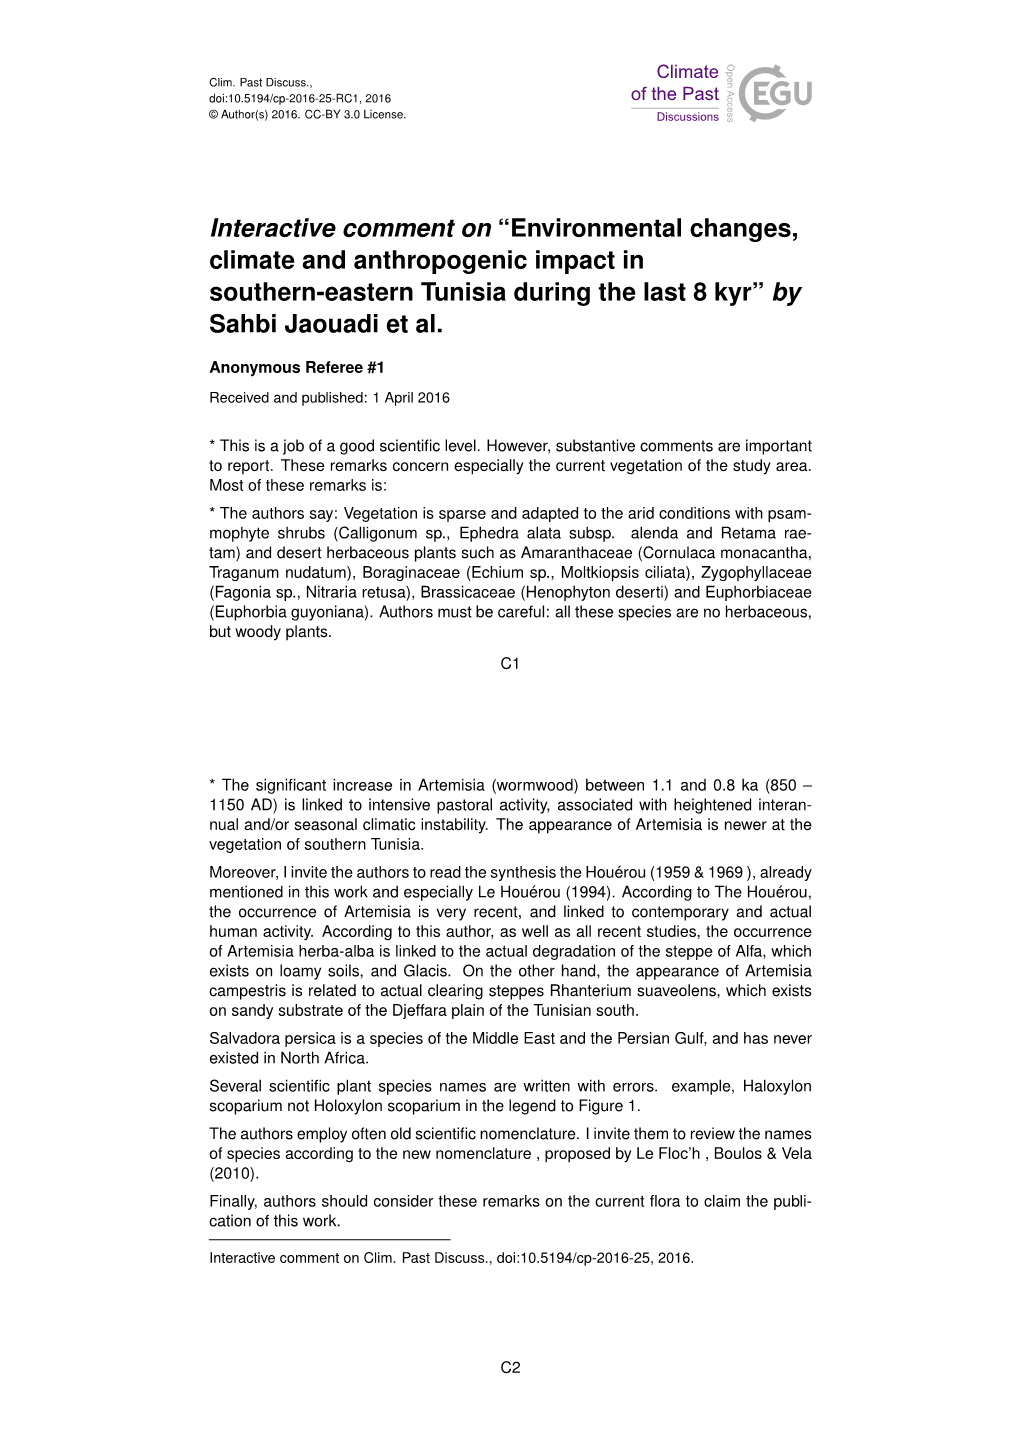 Environmental Changes, Climate and Anthropogenic Impact in Southern-Eastern Tunisia During the Last 8 Kyr” by Sahbi Jaouadi Et Al